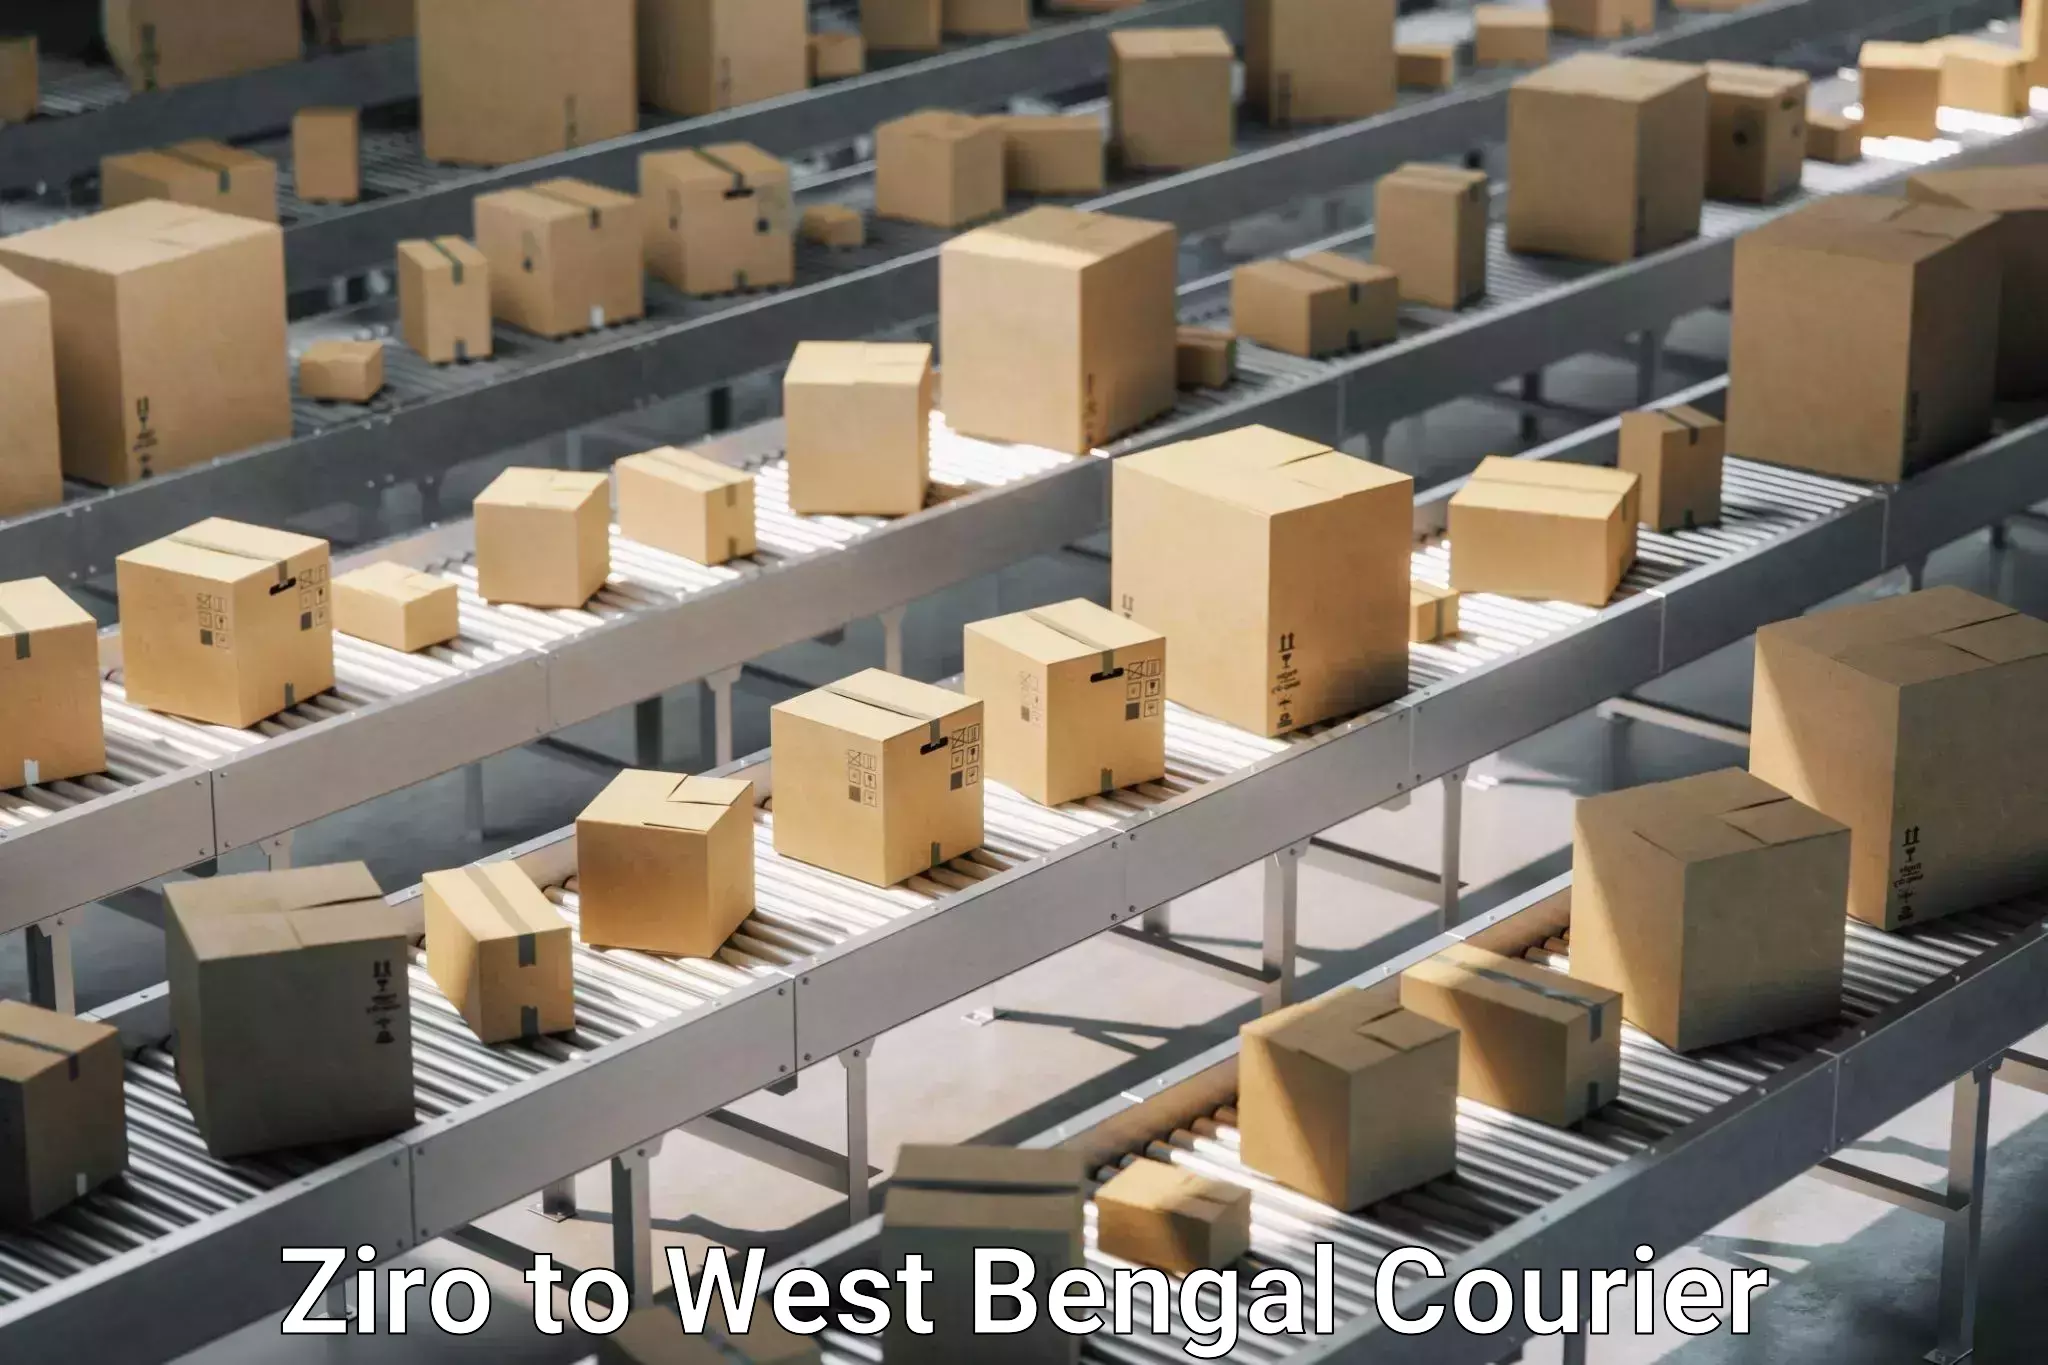 Trusted relocation experts Ziro to West Bengal